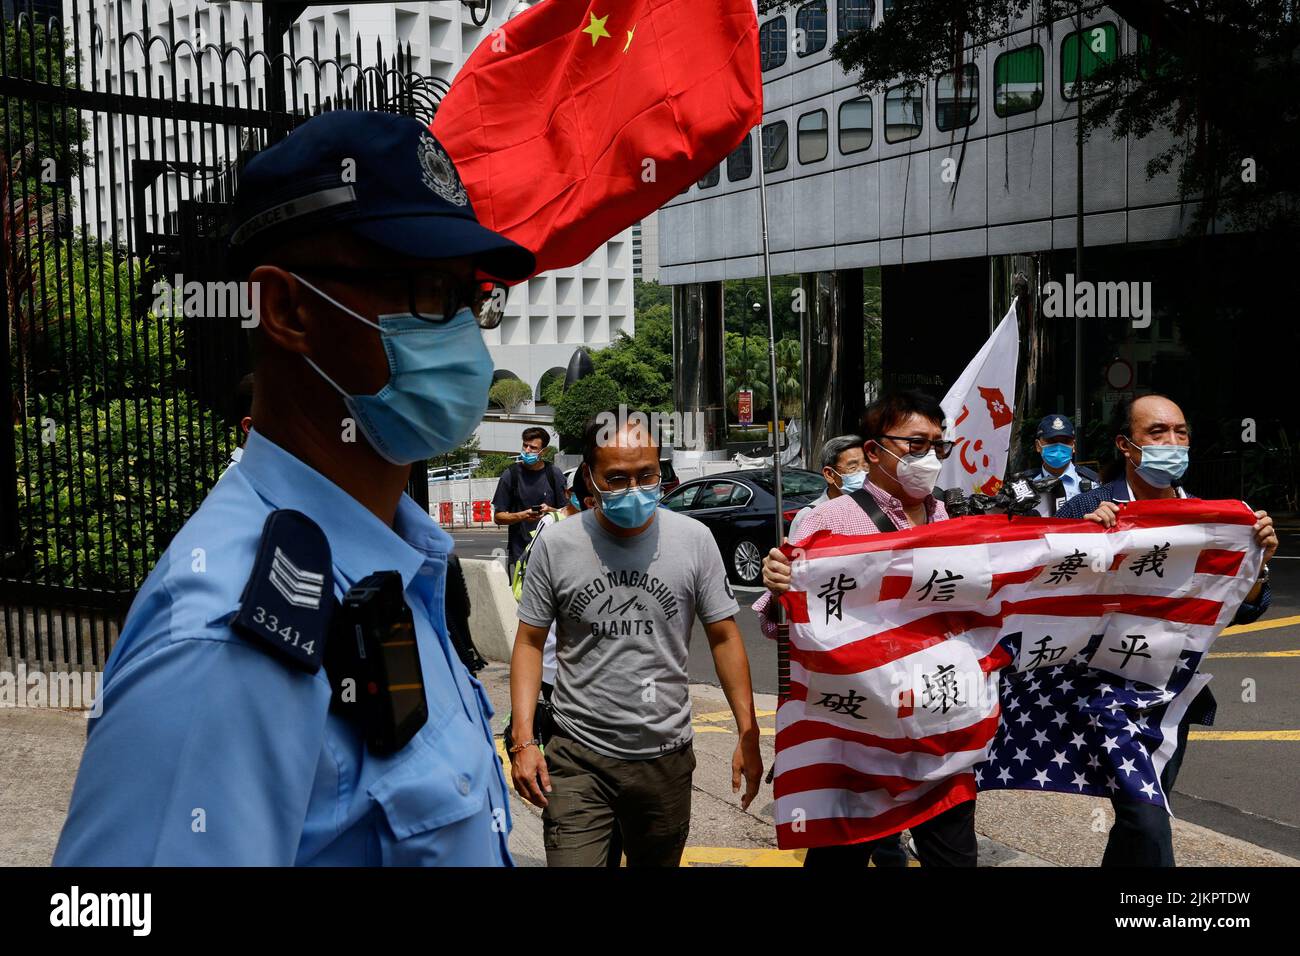 Pro-China supporters protest against U.S. House of Representatives Speaker Nancy Pelosi's visit to Taiwan, in Hong Kong, China August 3, 2022. REUTERS/Tyrone Siu Stock Photo